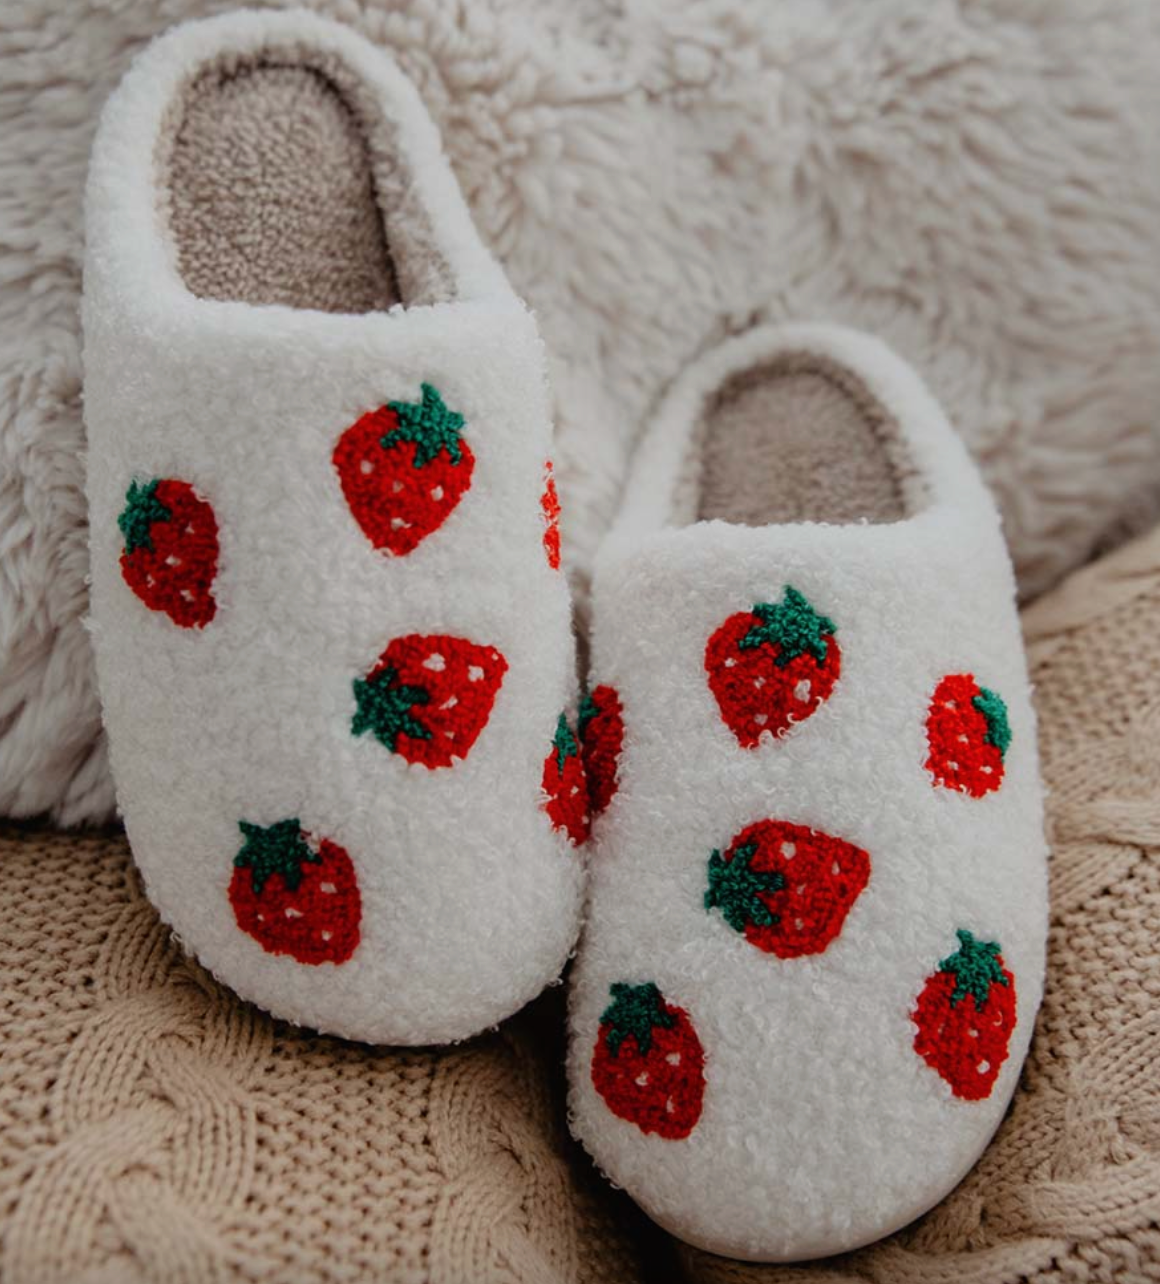 Strawberry Fuzzy Slippers - Lark & Lily Boutique